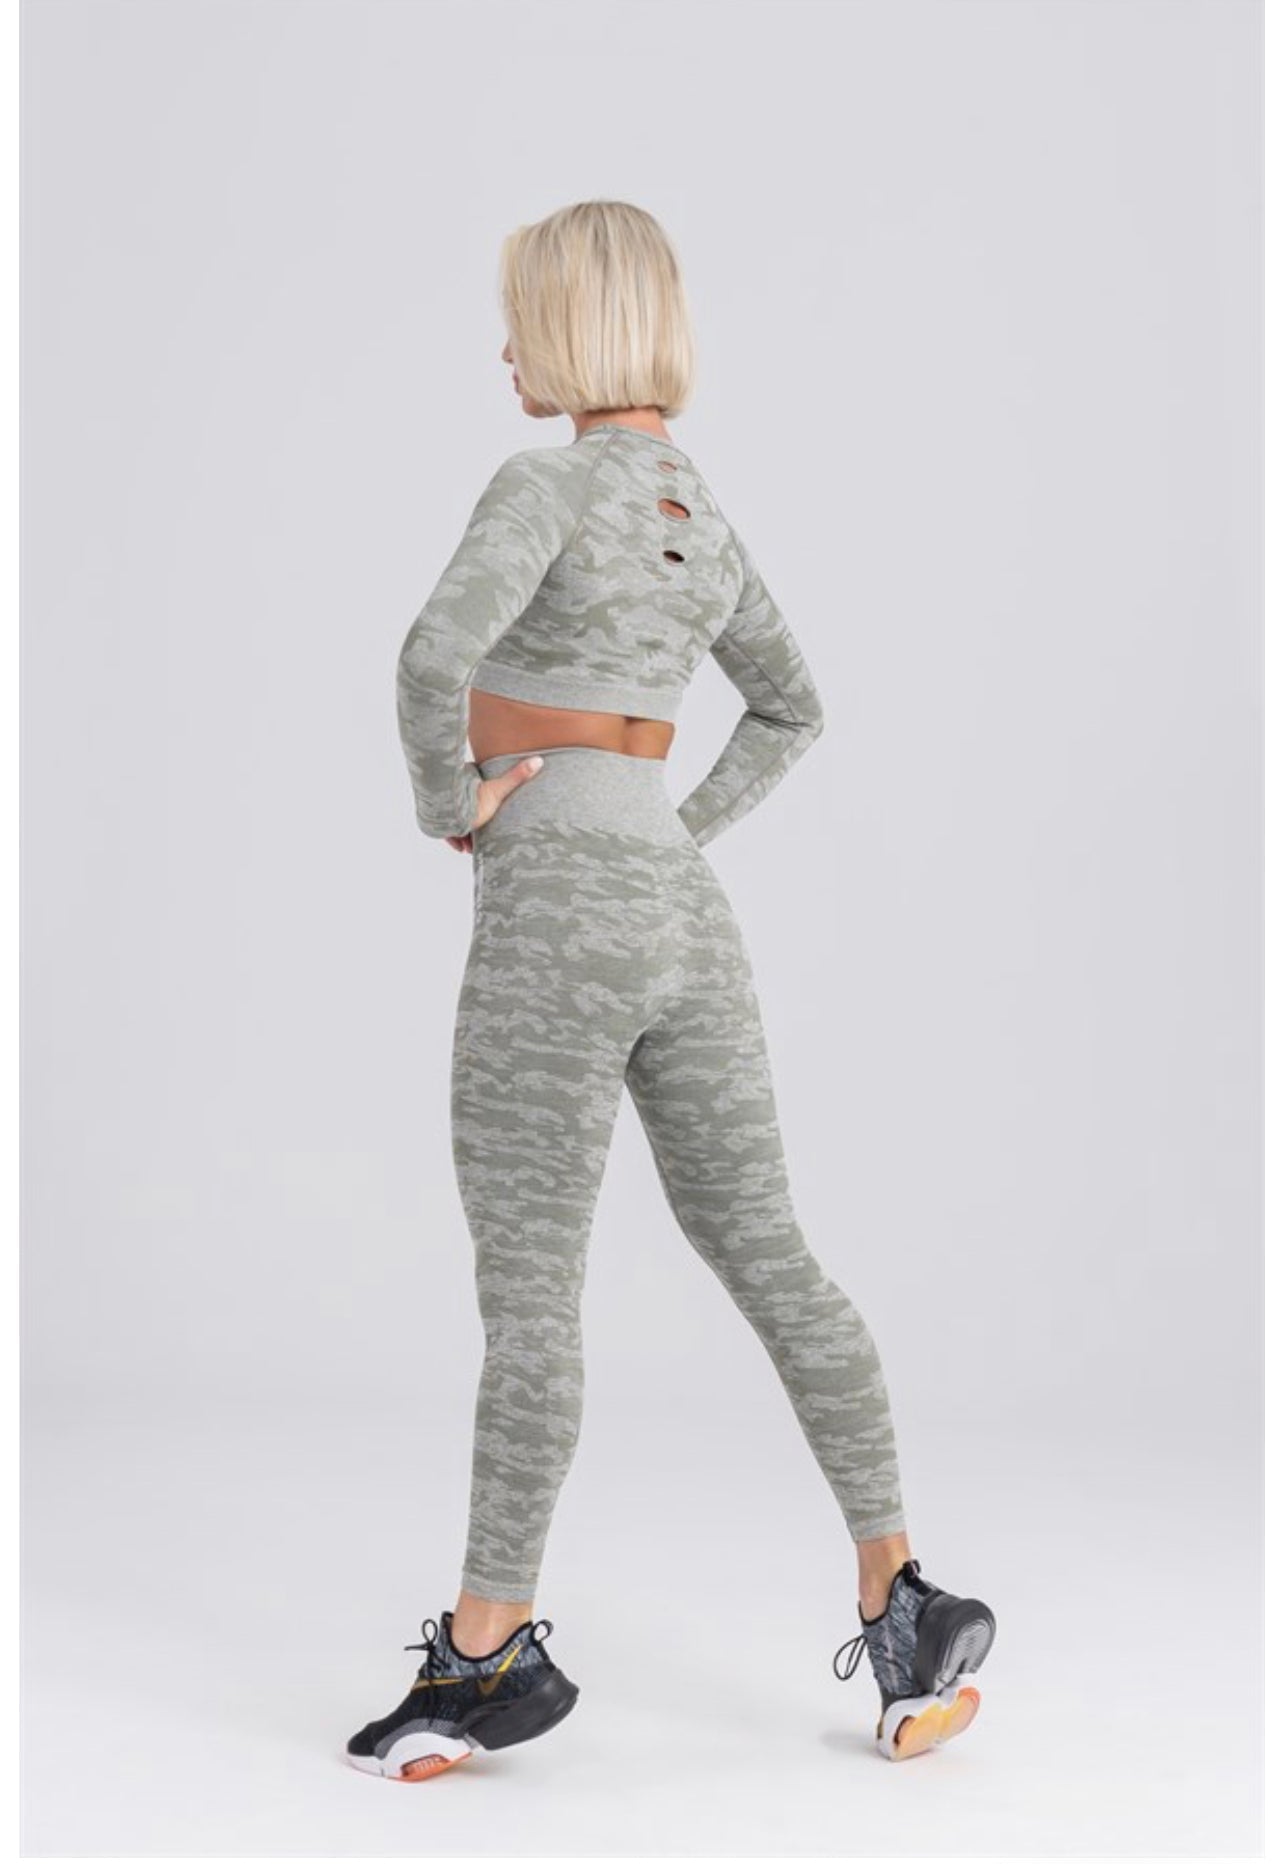 Gymwolves Seamless Sport Leggings Camouflage Pattern | Action Series |